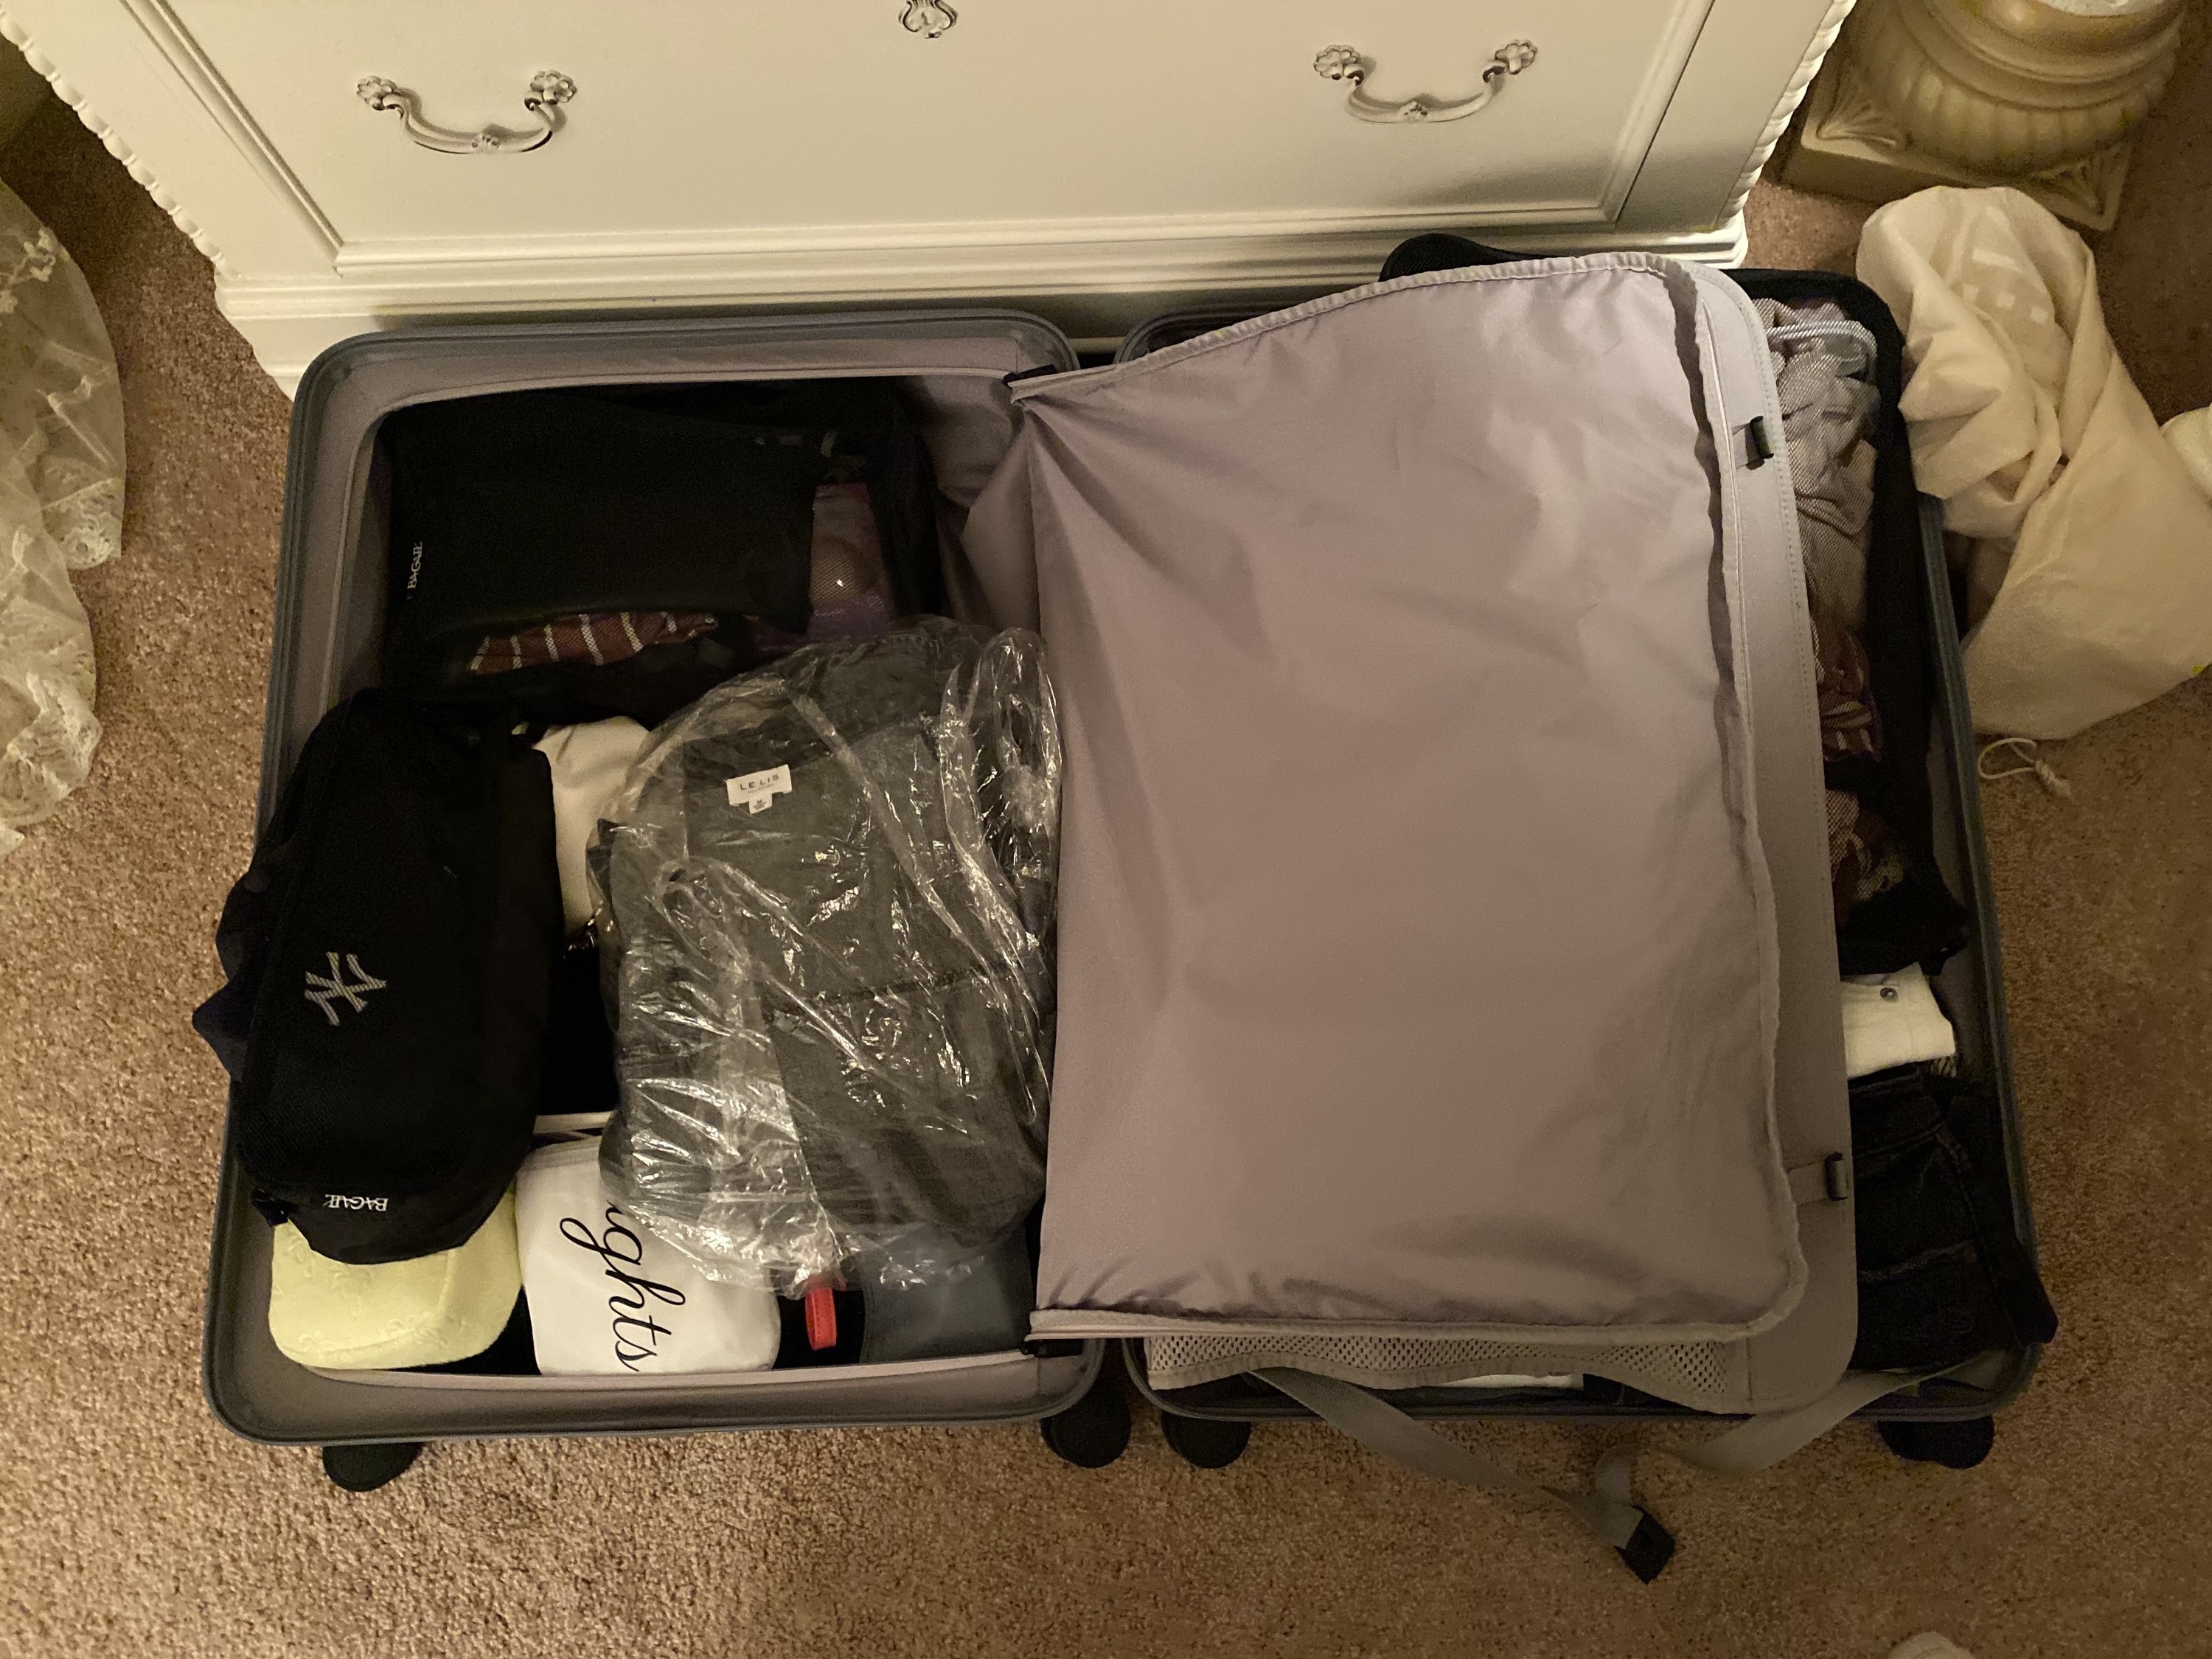 packed suitcase